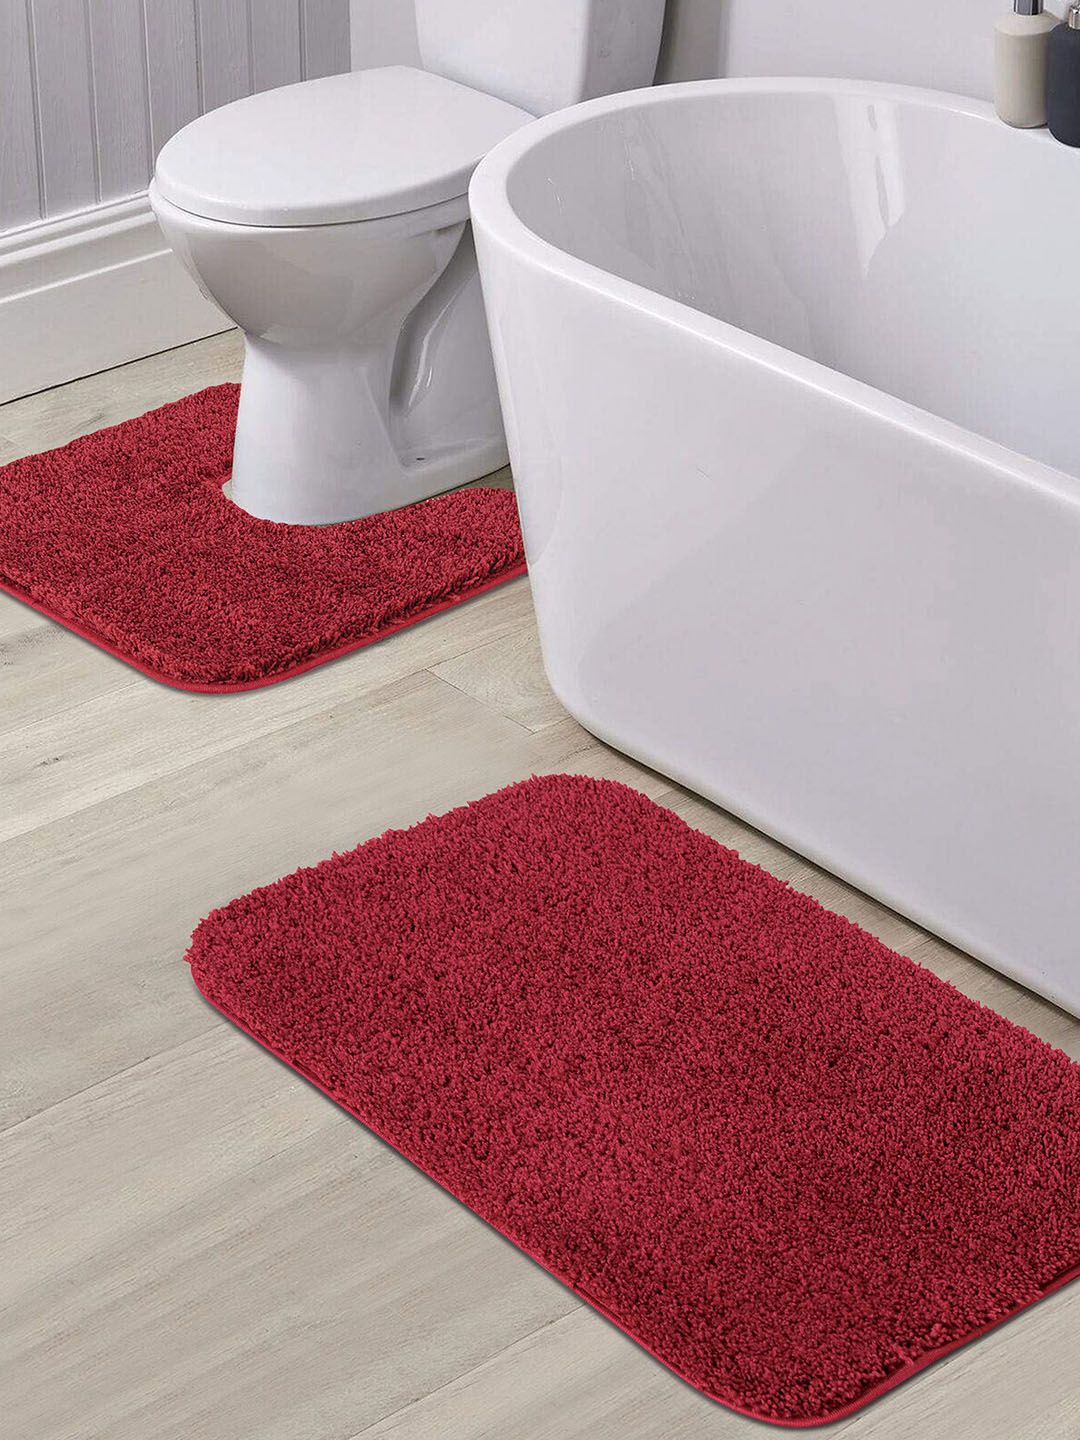 OBSESSIONS Burgundy Solid Anti-skid Bath Mat With Contour Mat Bath Rugs Price in India